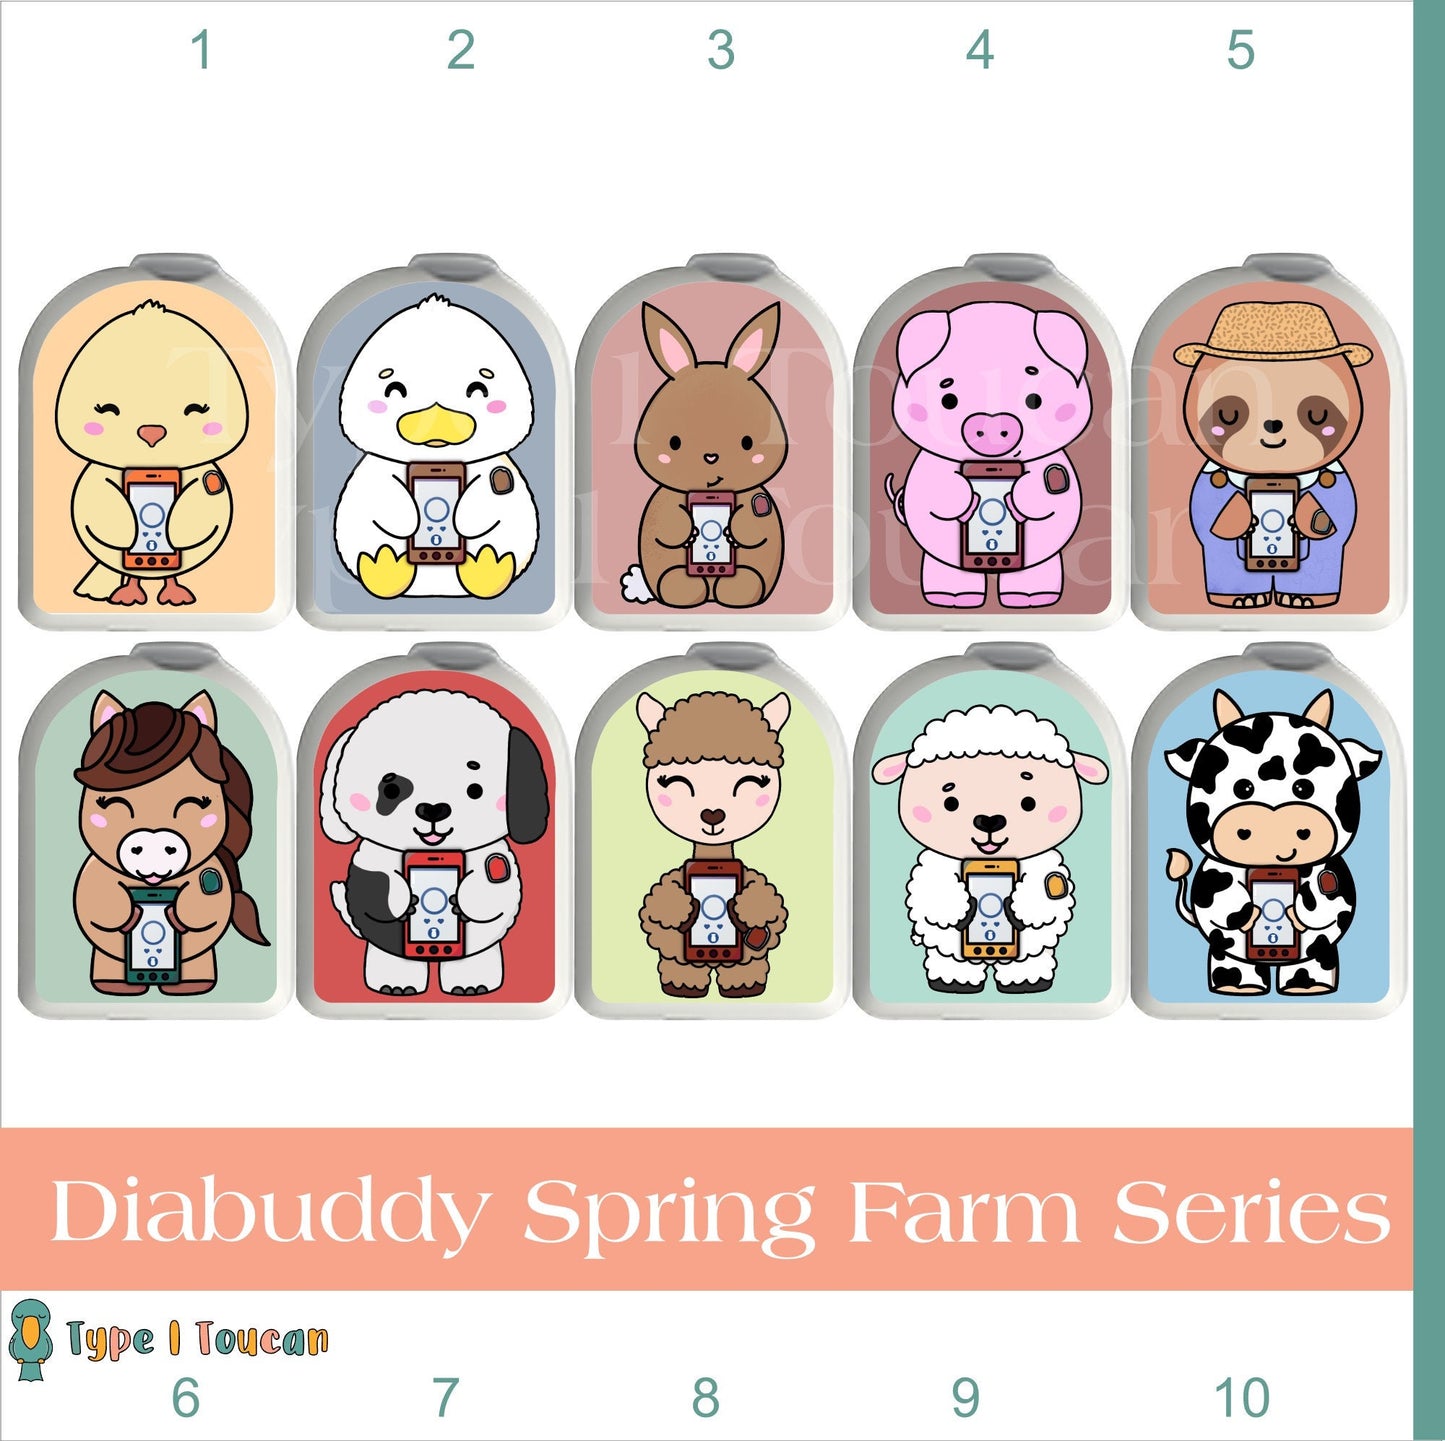 Spring Farm Diabuddy Omnipod Stickers, Easter Omnipod Dash Stickers, Omnipod 5 Stickers, Omnipod Eros Stickers, Pod Stickers, Cow, Horse Pig